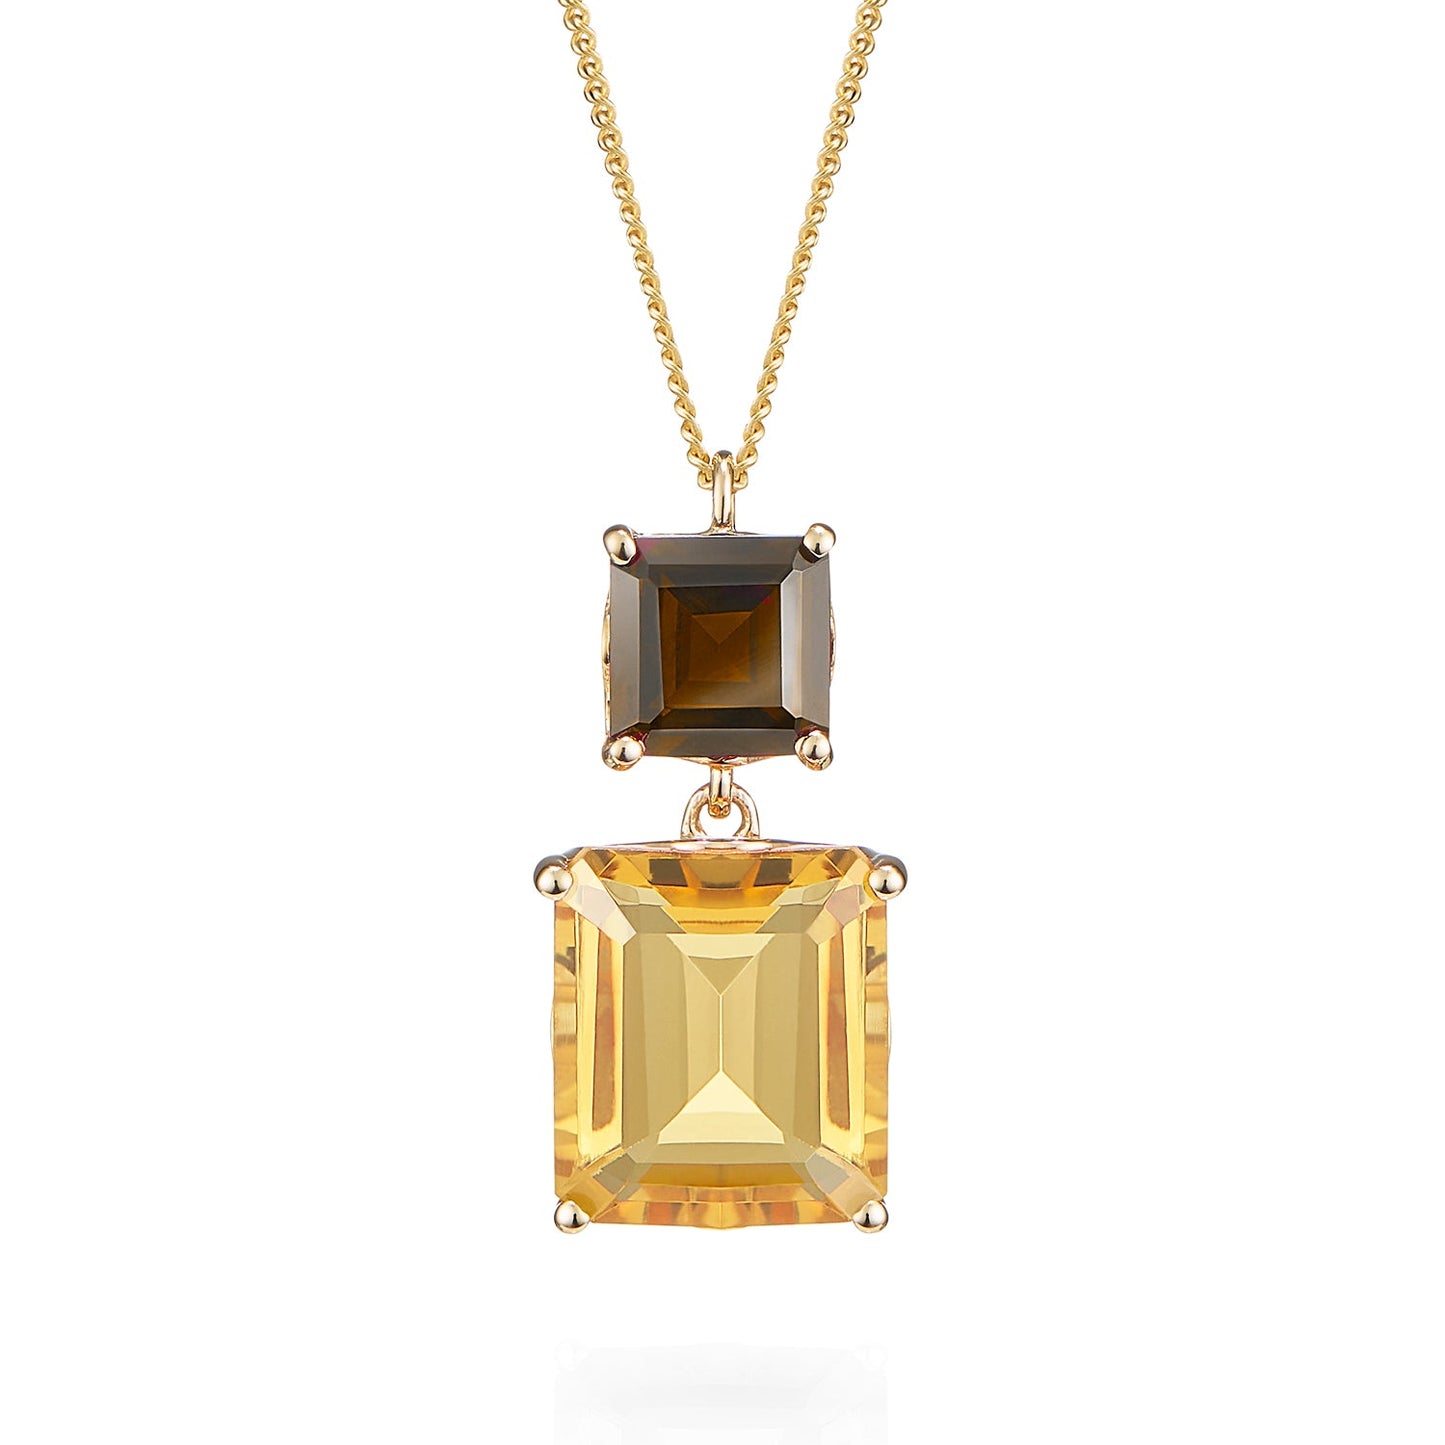 London-made luxury custom gold gemstone jewellery -9ct Yellow Gold Octagon Pendent Necklace in Smoky Quartz and Citrine – Andalusian Collection, Augustine Jewellery, British Jewellers, Gemstone Jewellery, Luxury Jewellery London.